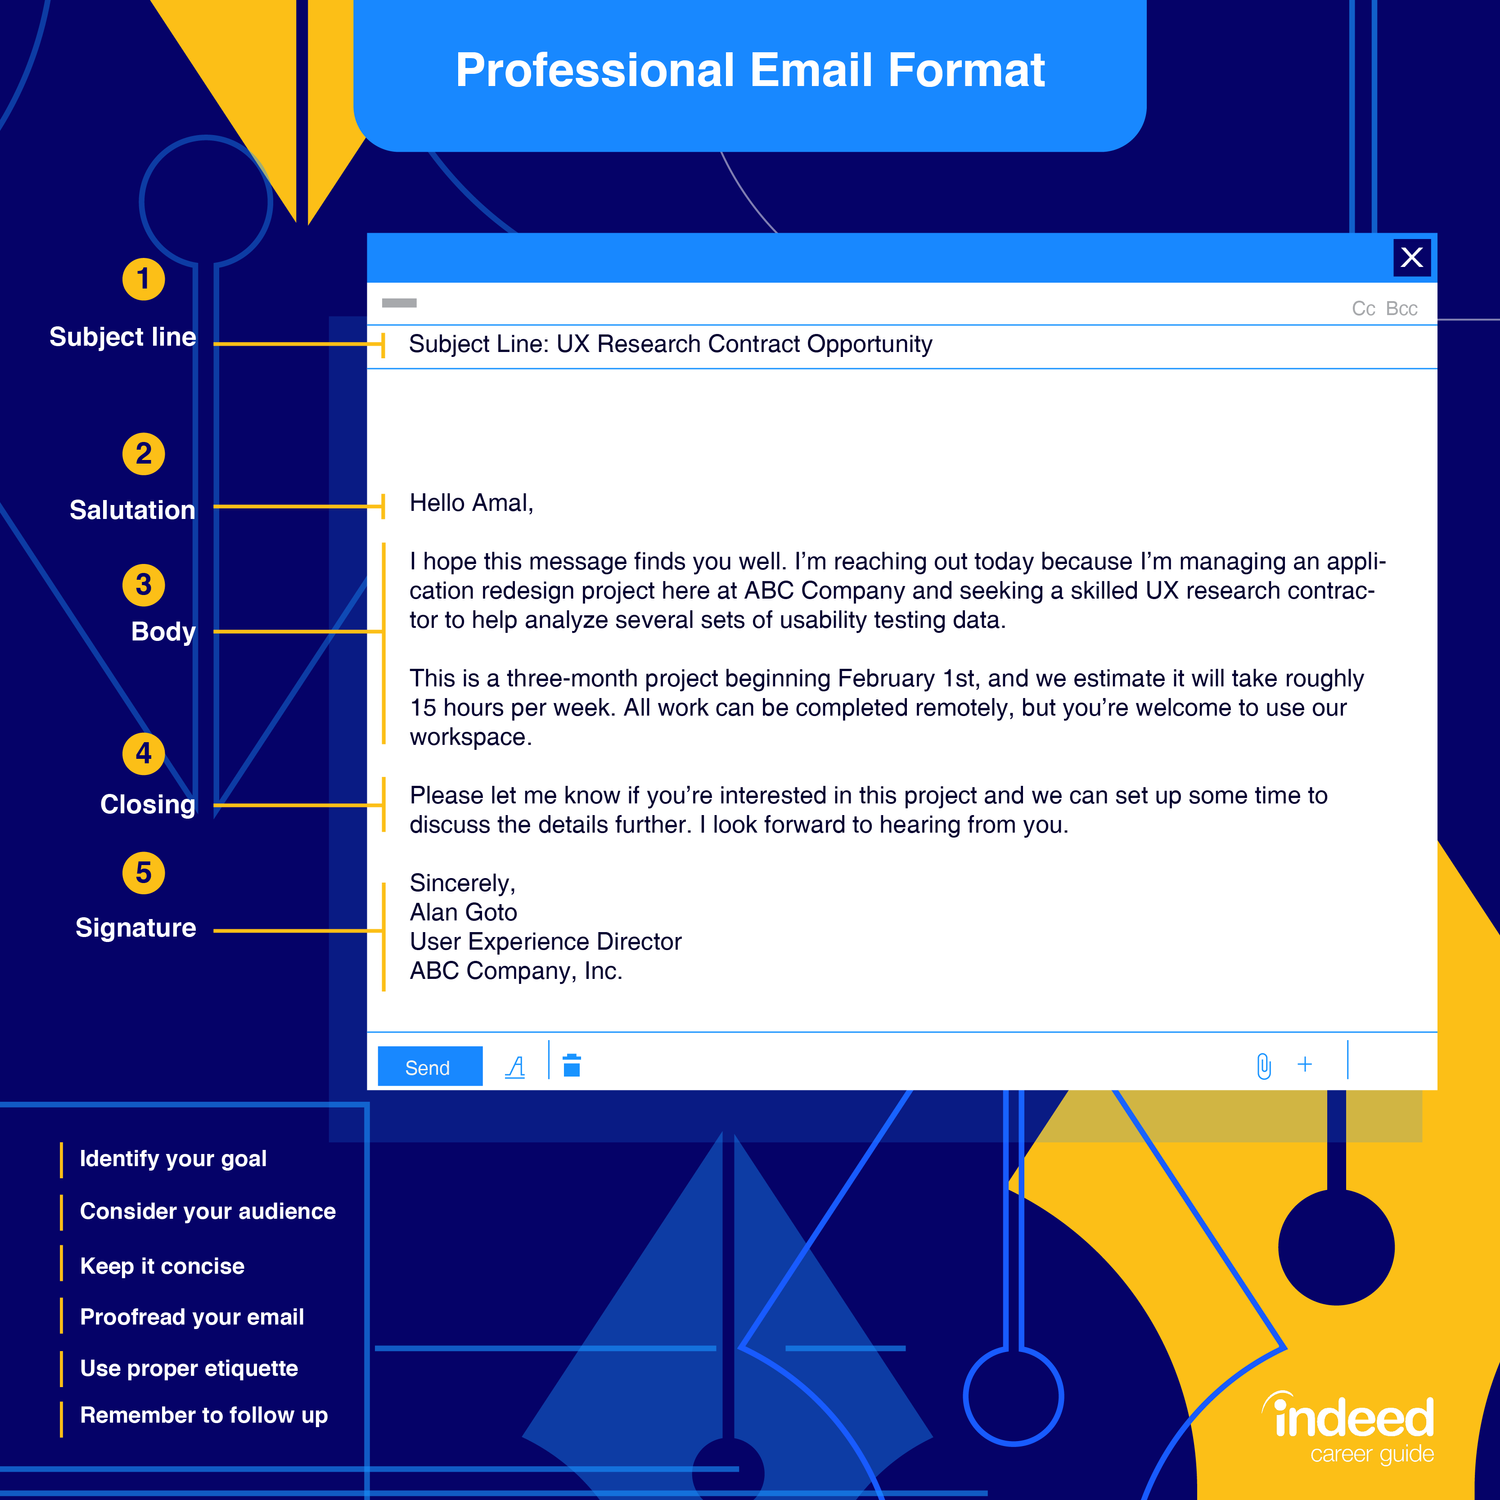 How To Write a Professional Email  Indeed.com